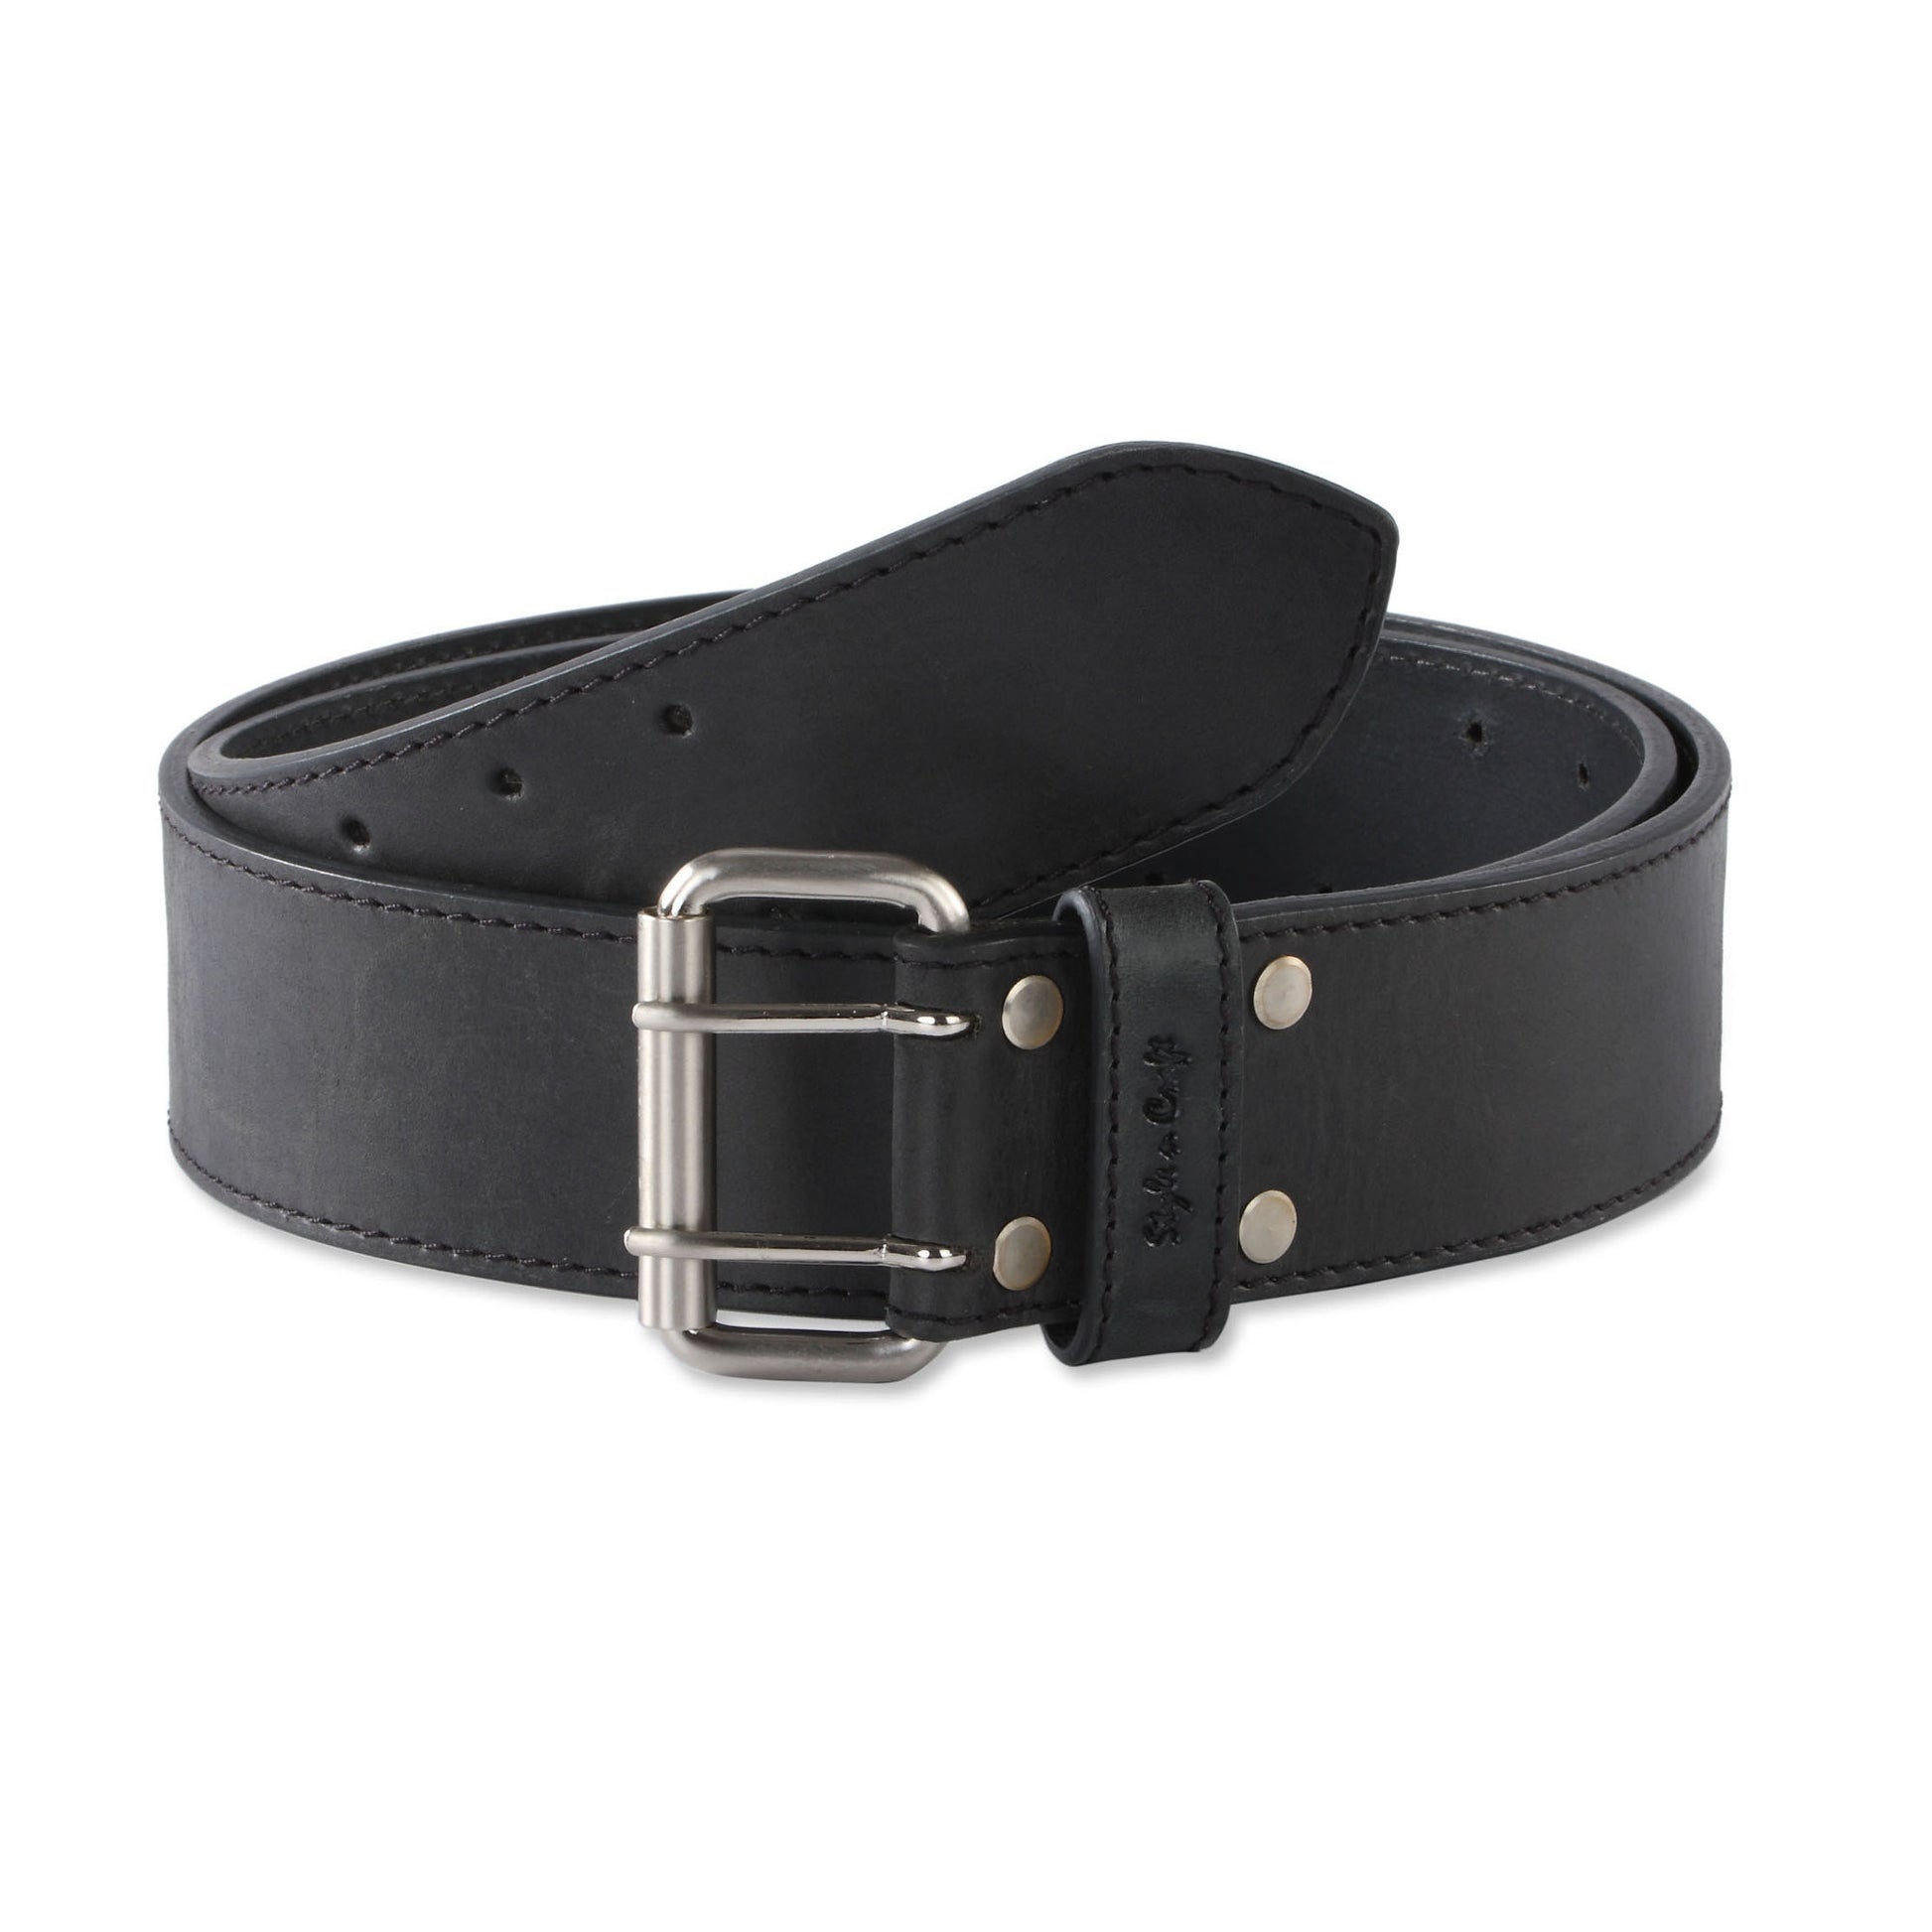 Made in Spain heavy silver tone brown leather belt.